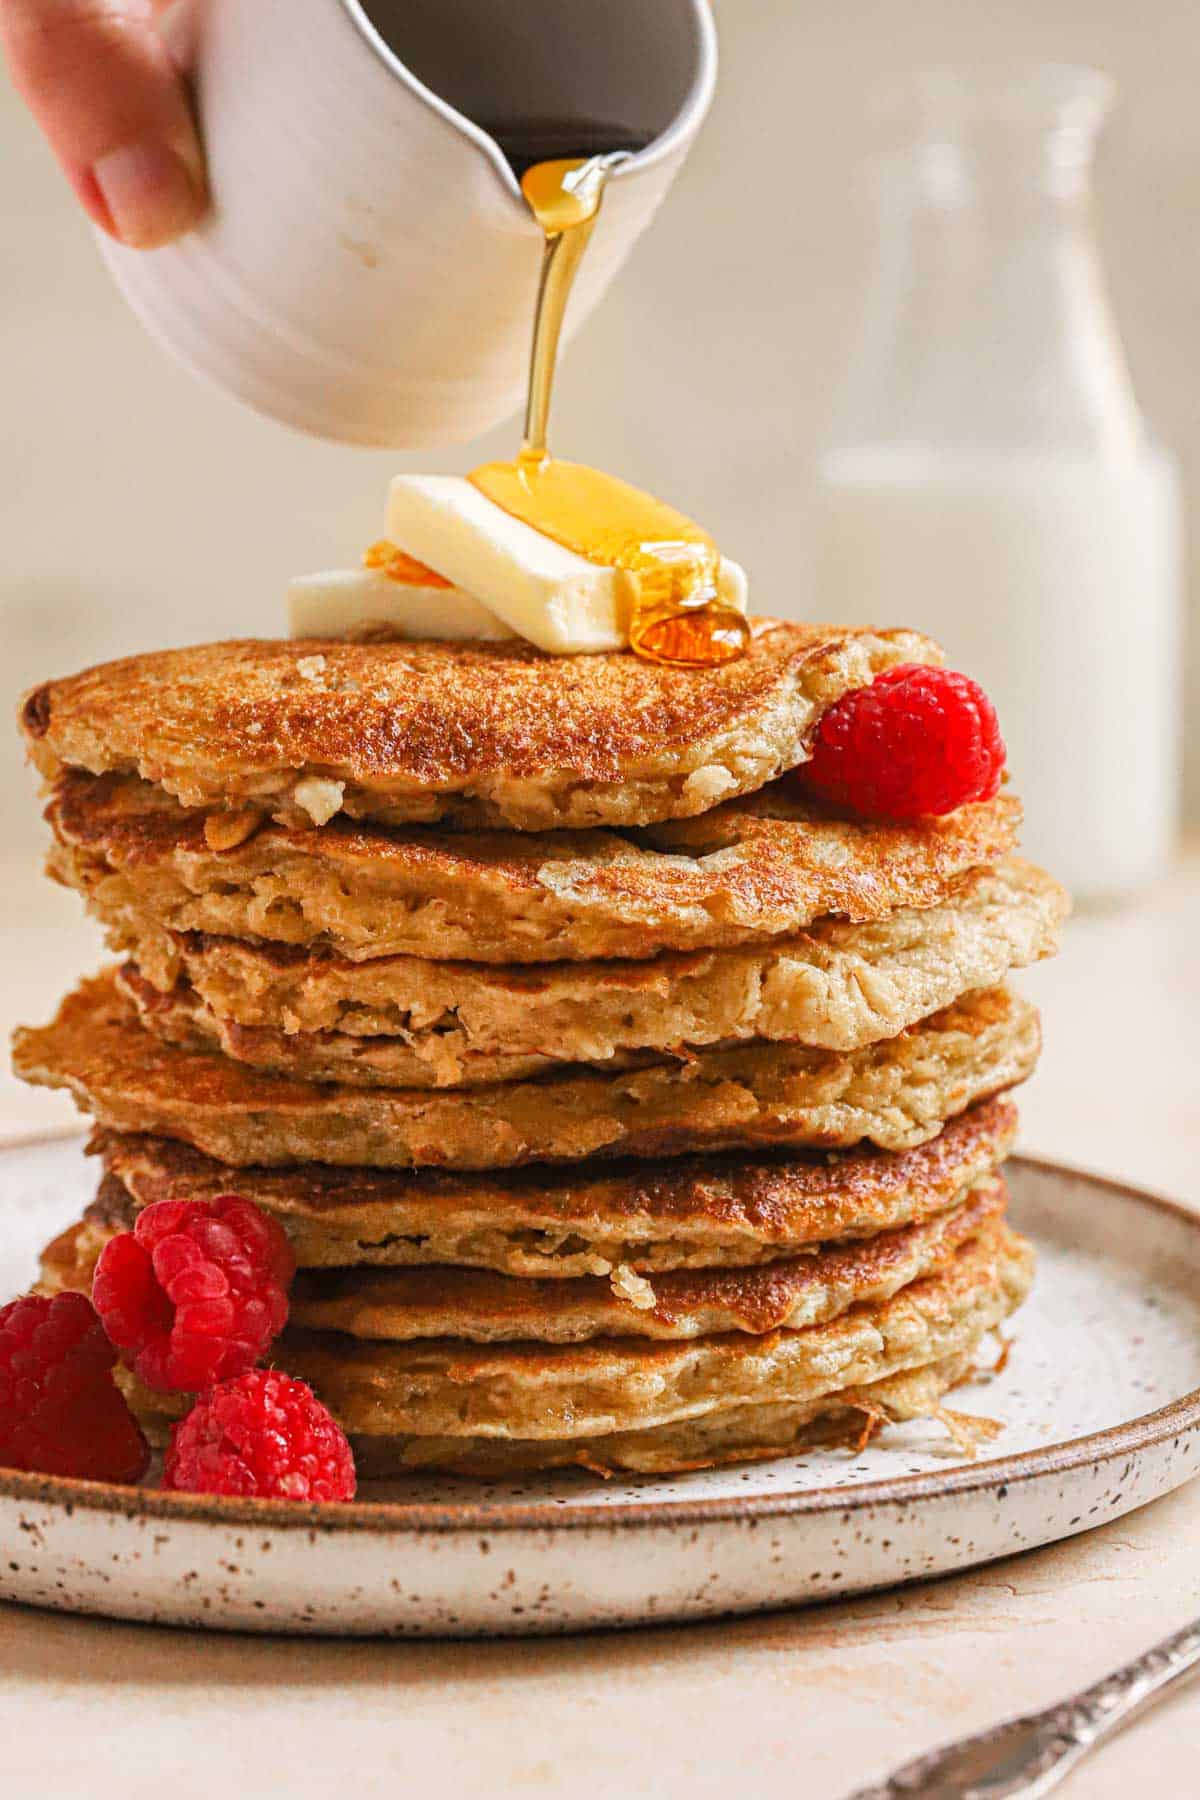 Large stack of oatmeal pancakes on ceramic plate with syrup being poured on top.